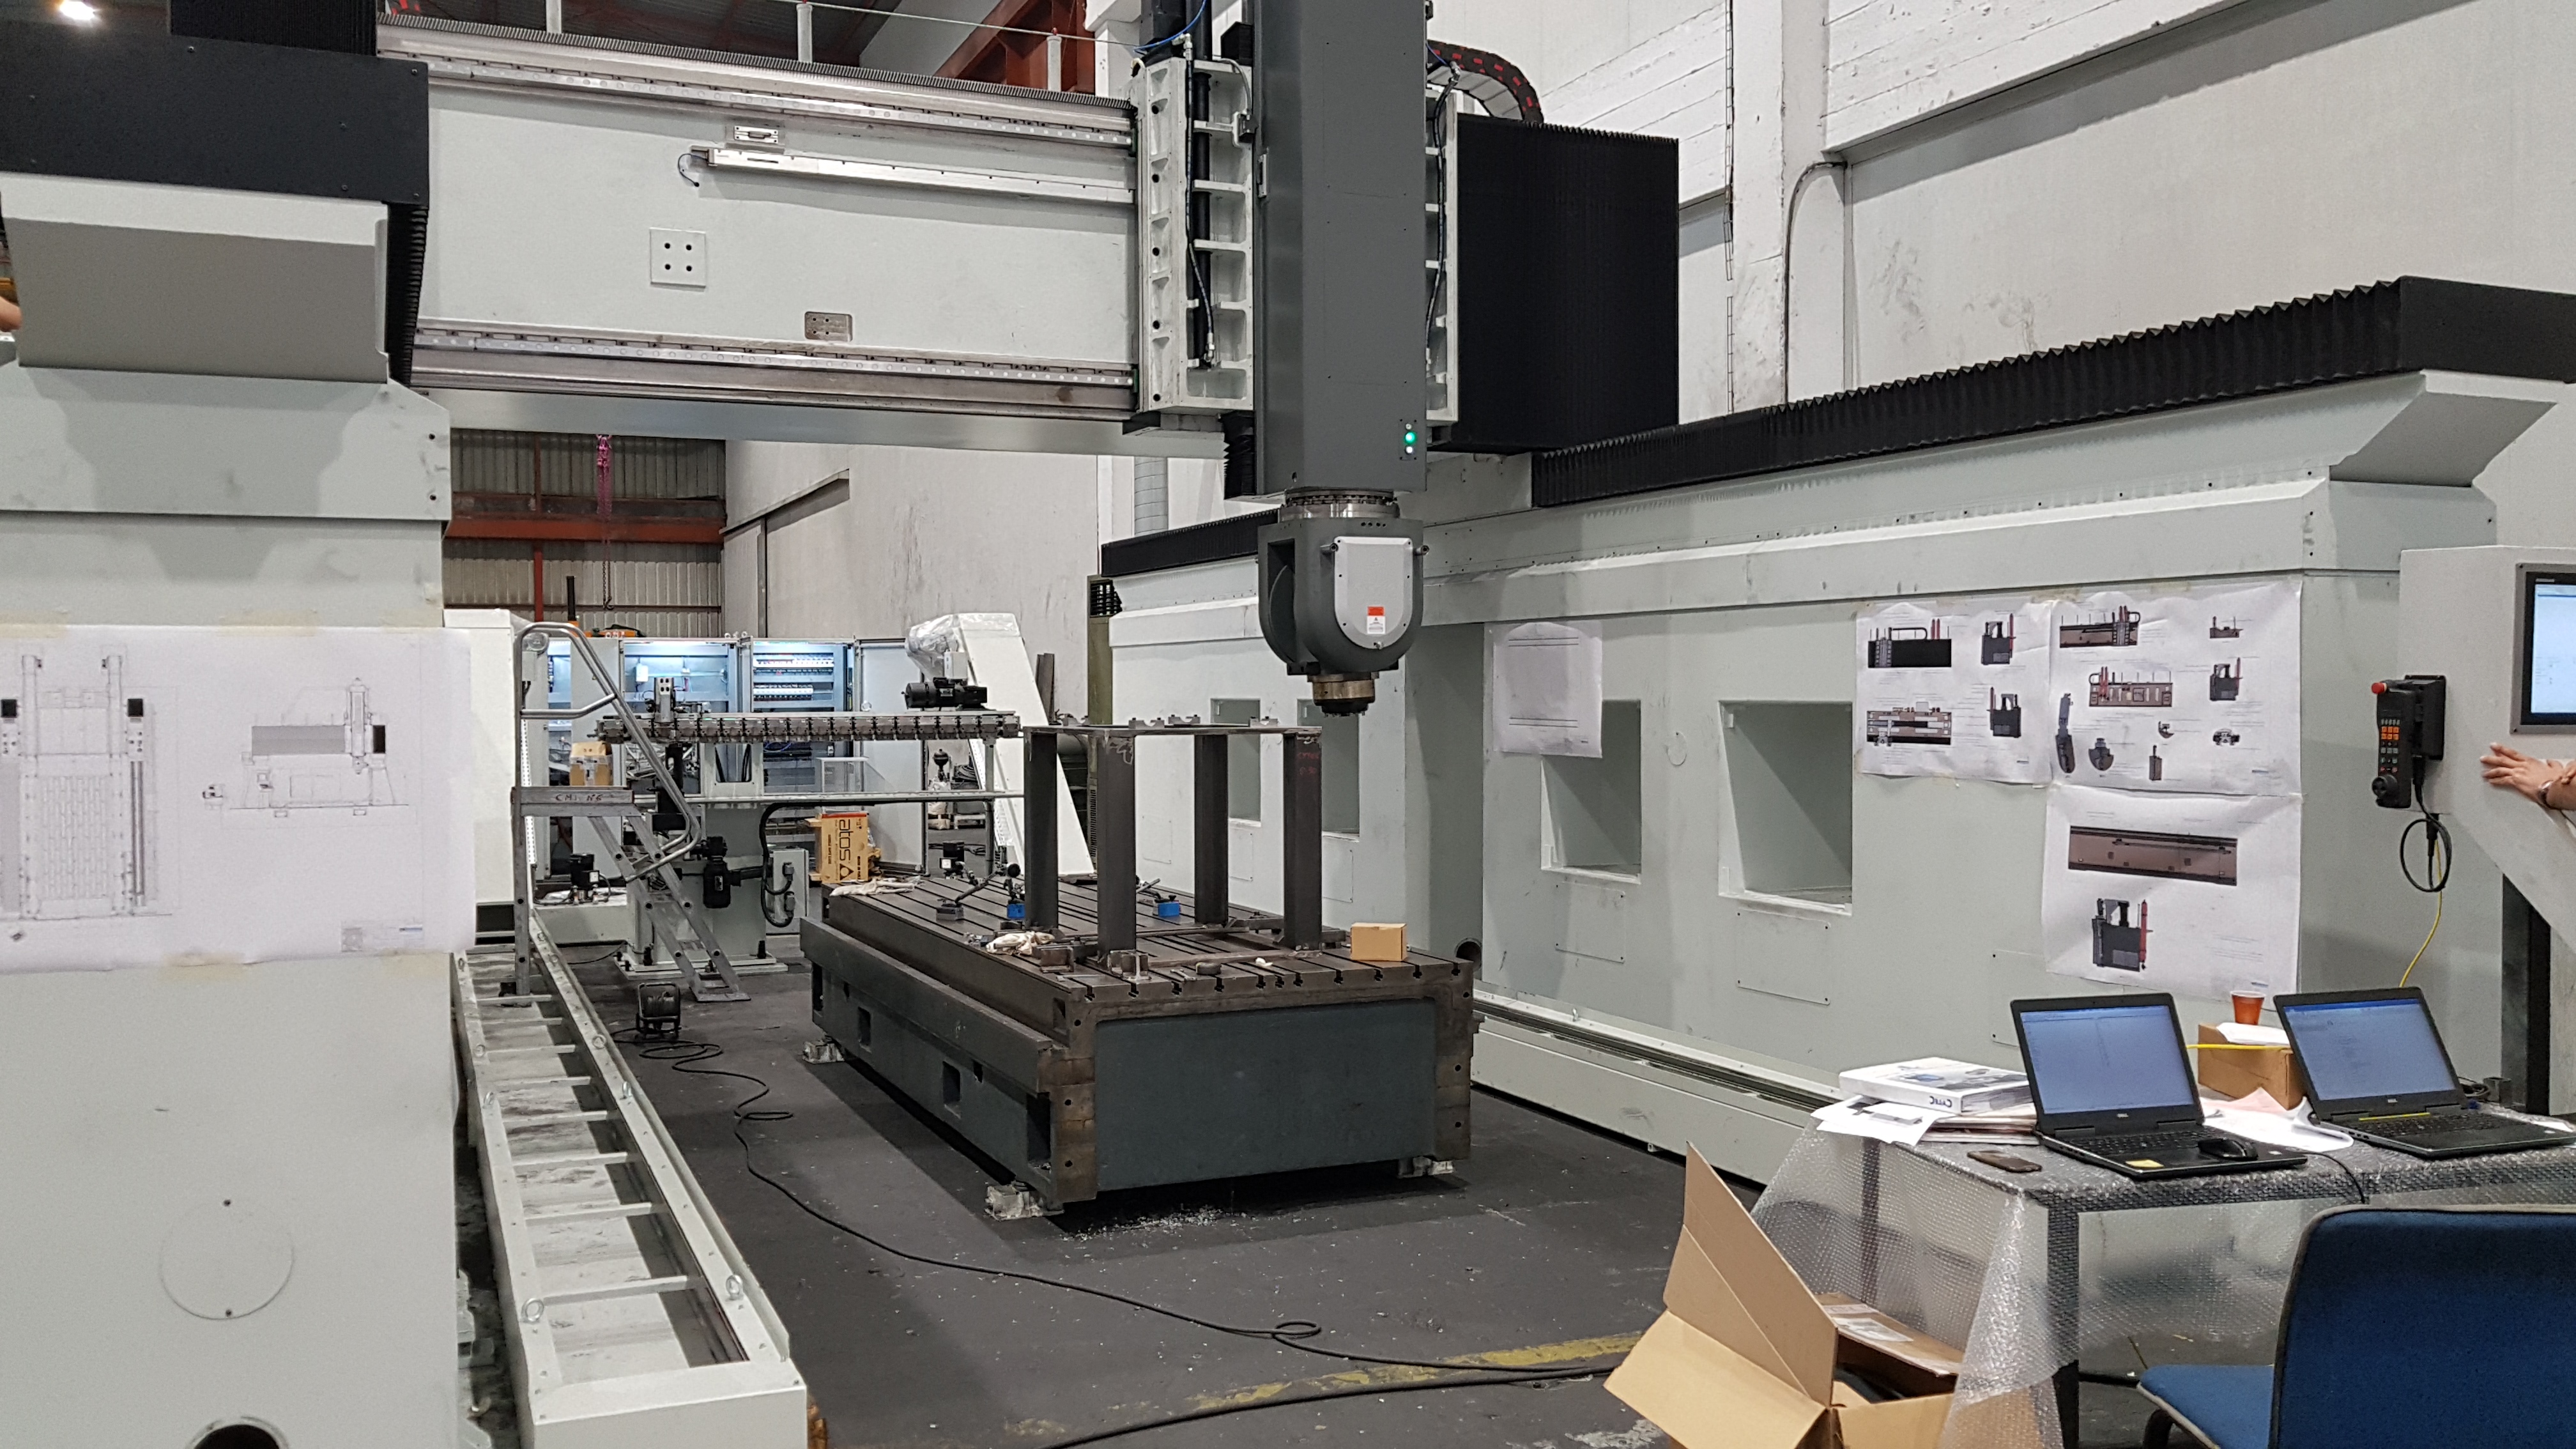 CMI Durango sells a 5-axis gantry milling machine to the MAGNA group in Mexico.